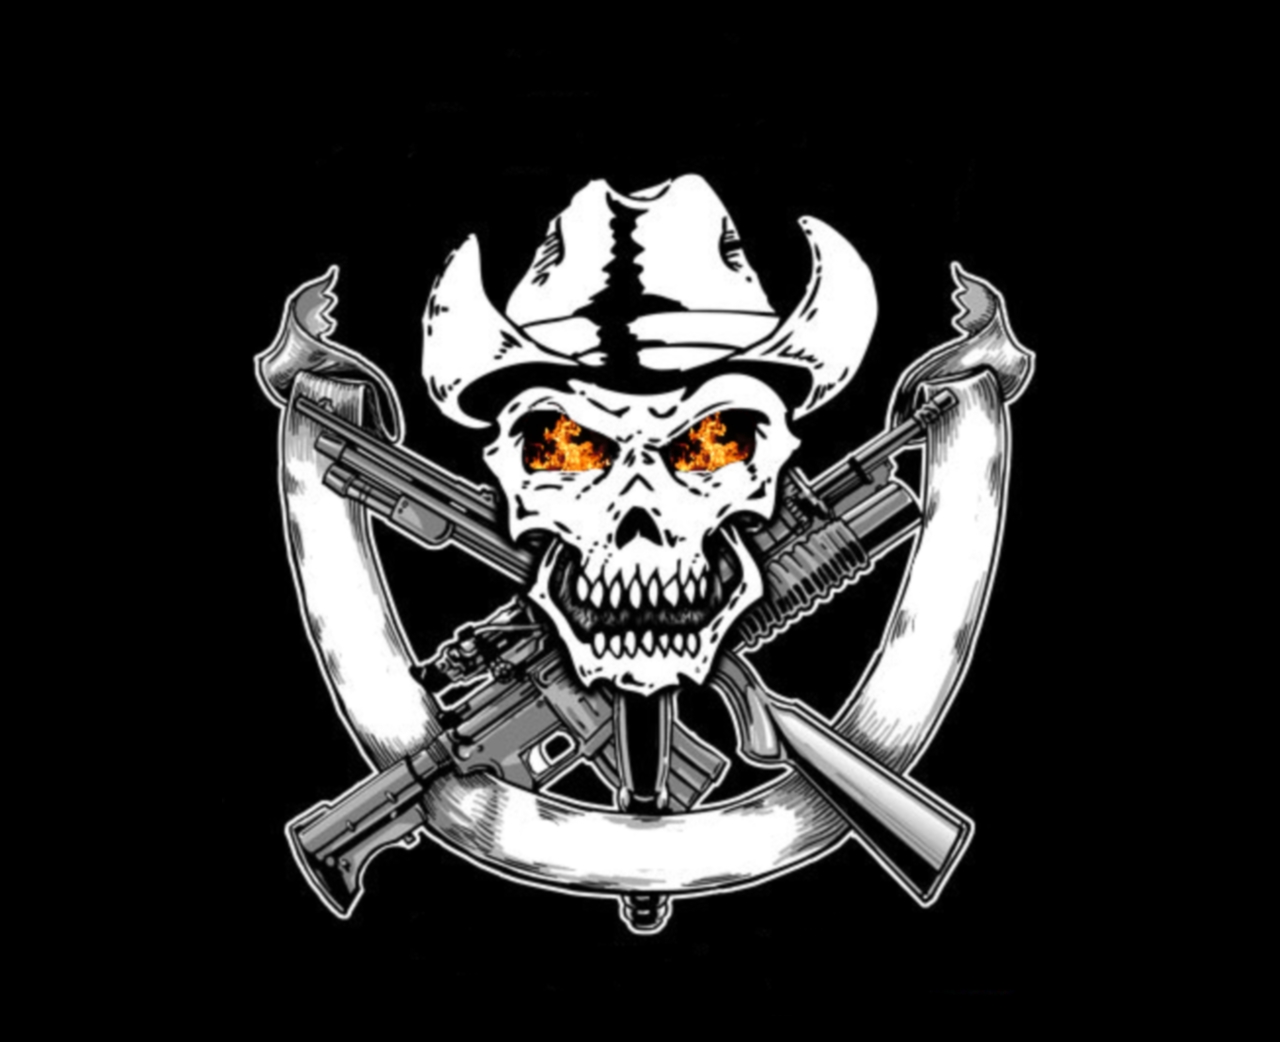 Cool Skull And Guns Wallpaper Image Amp Pictures Becuo